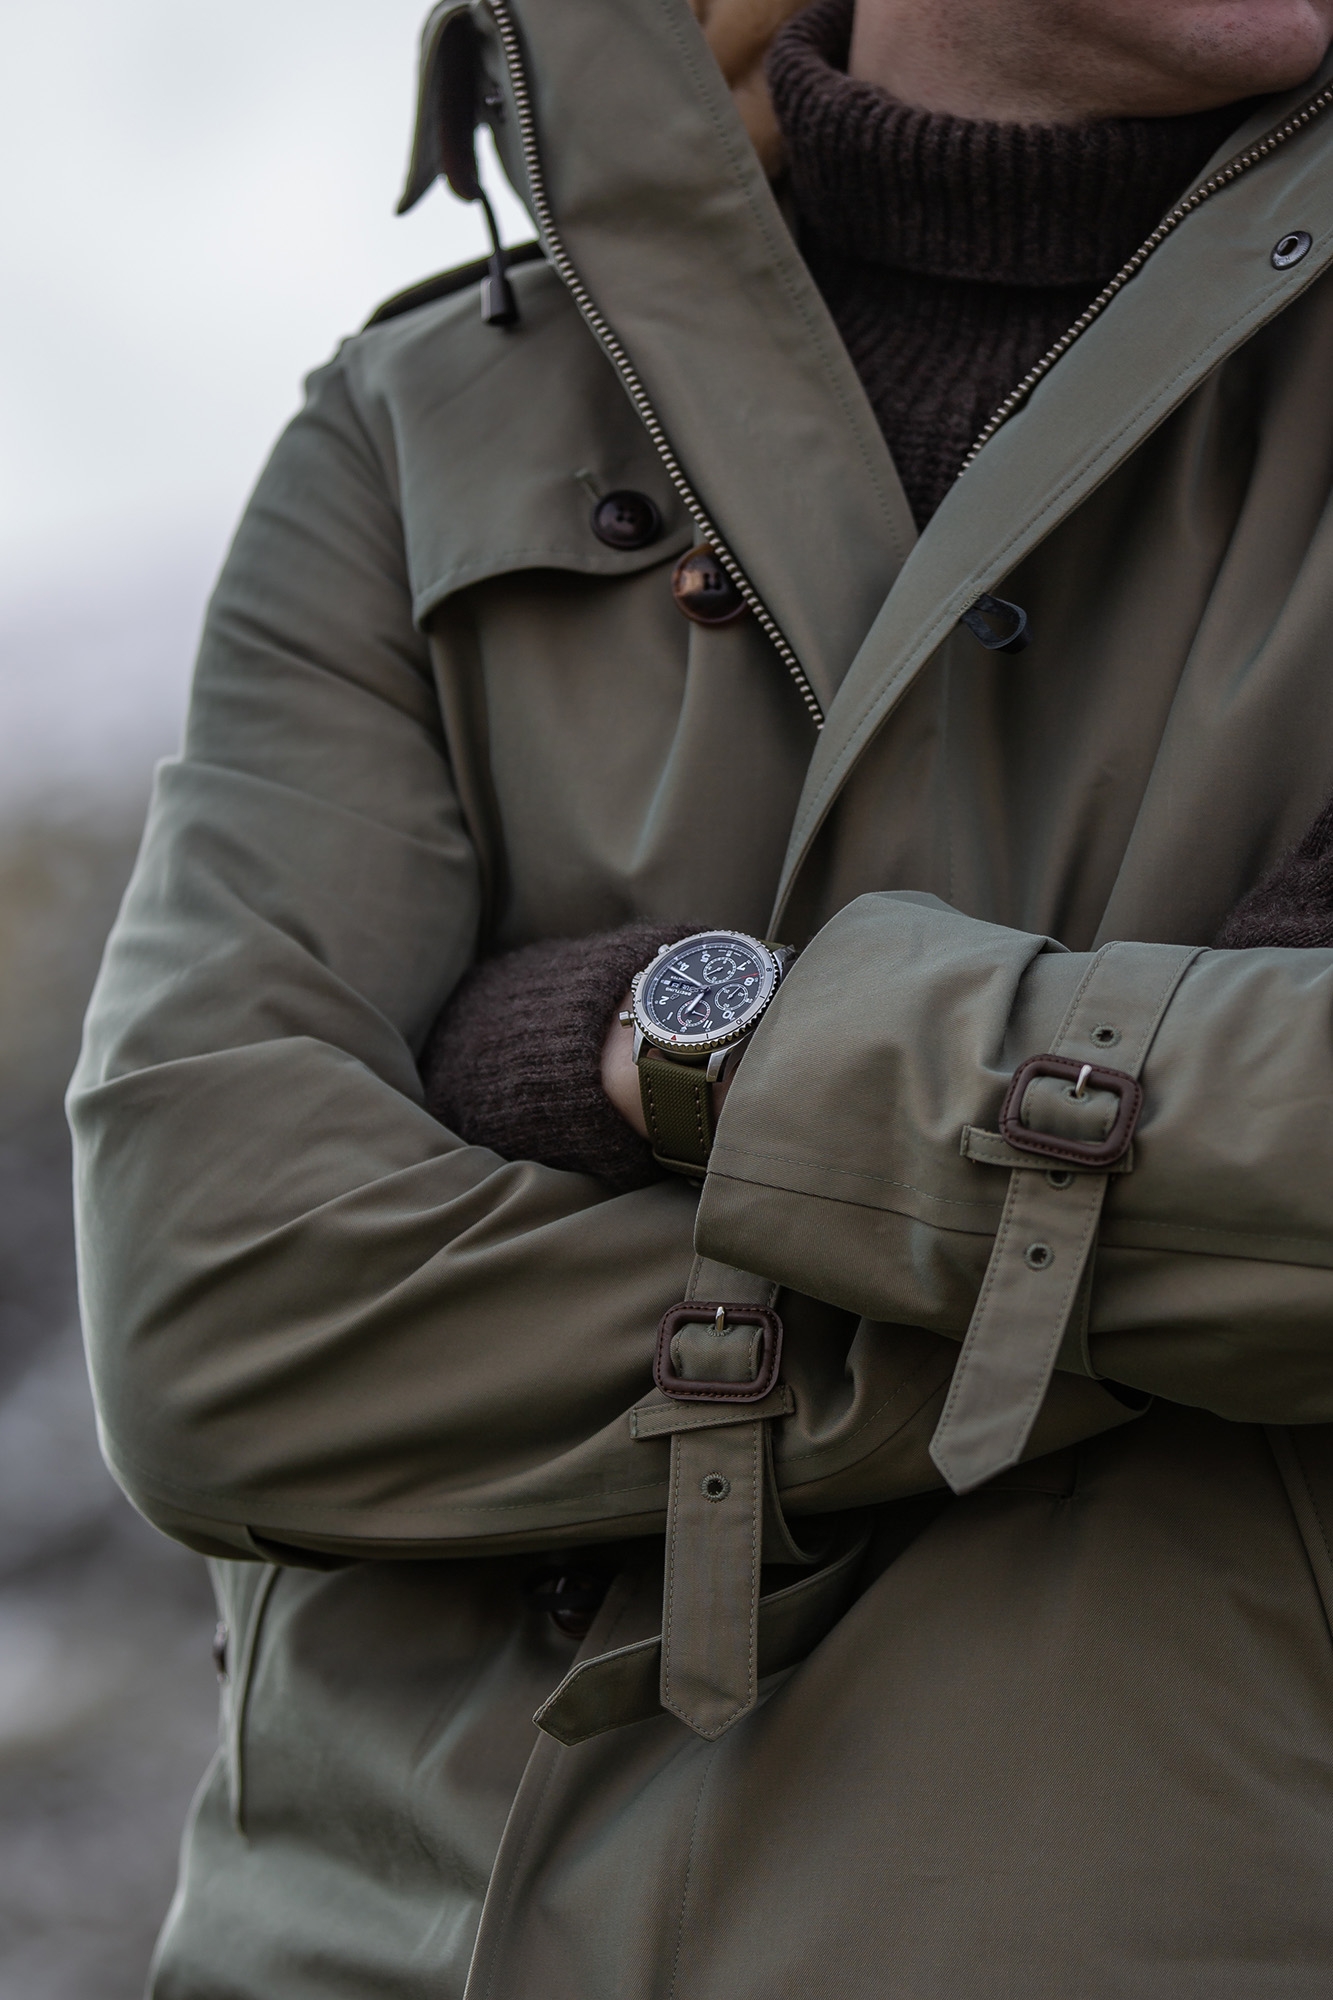 Man wearing Breitling watch outdoors